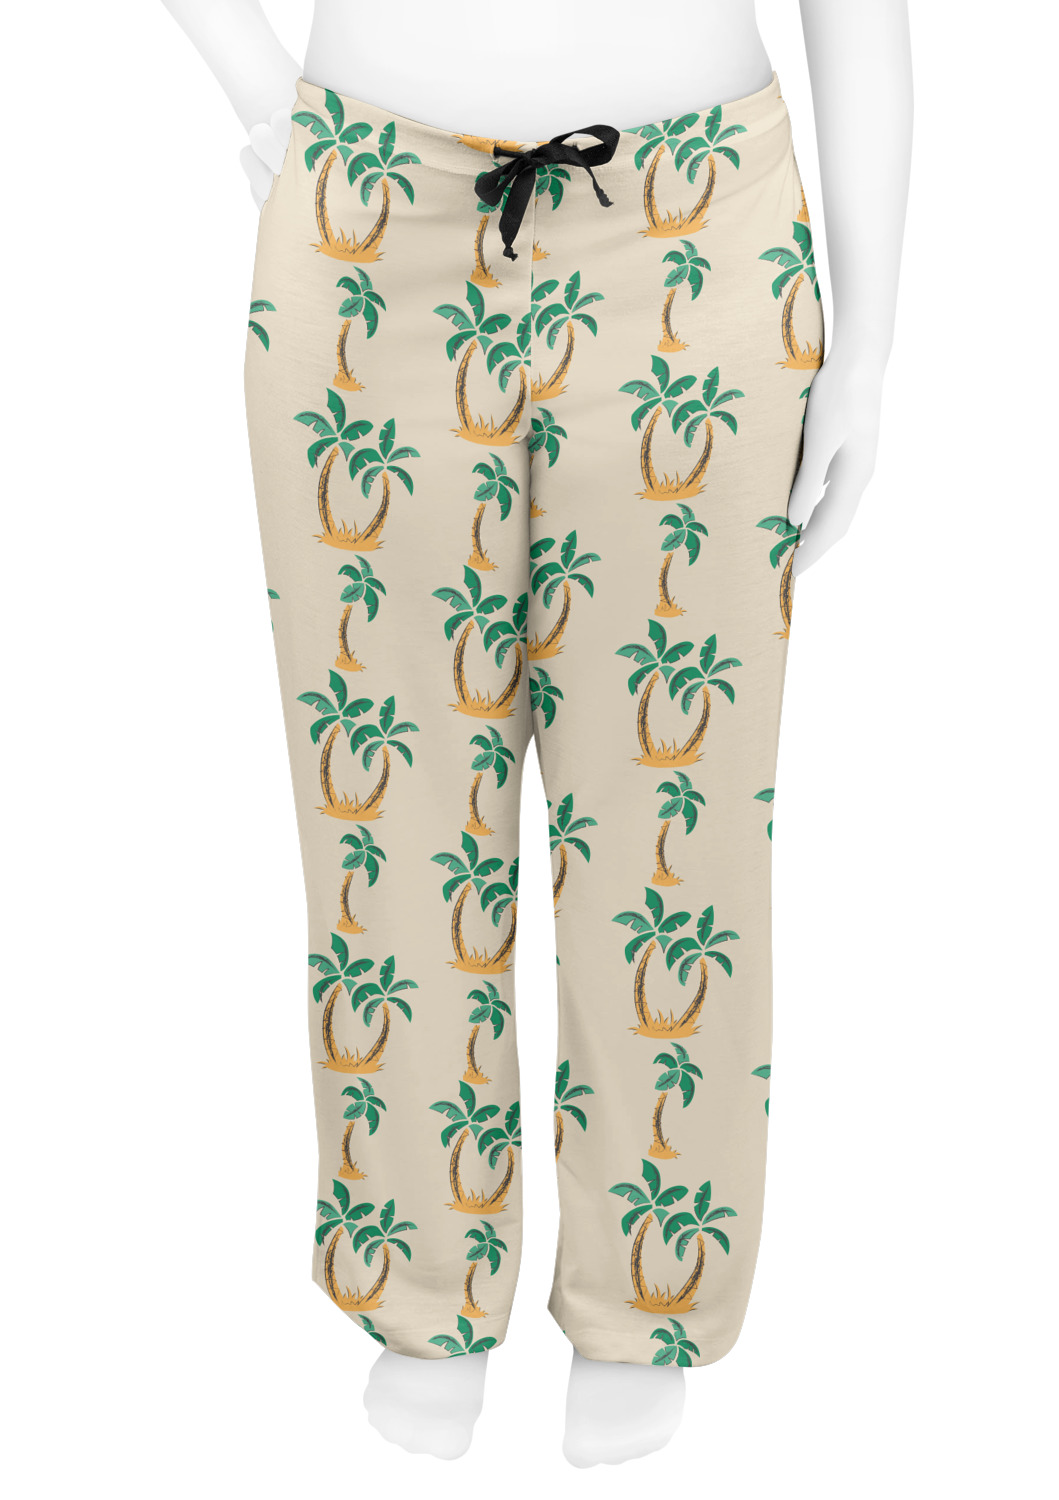 Palm Trees Womens Pajama Pants - L (Personalized) - YouCustomizeIt